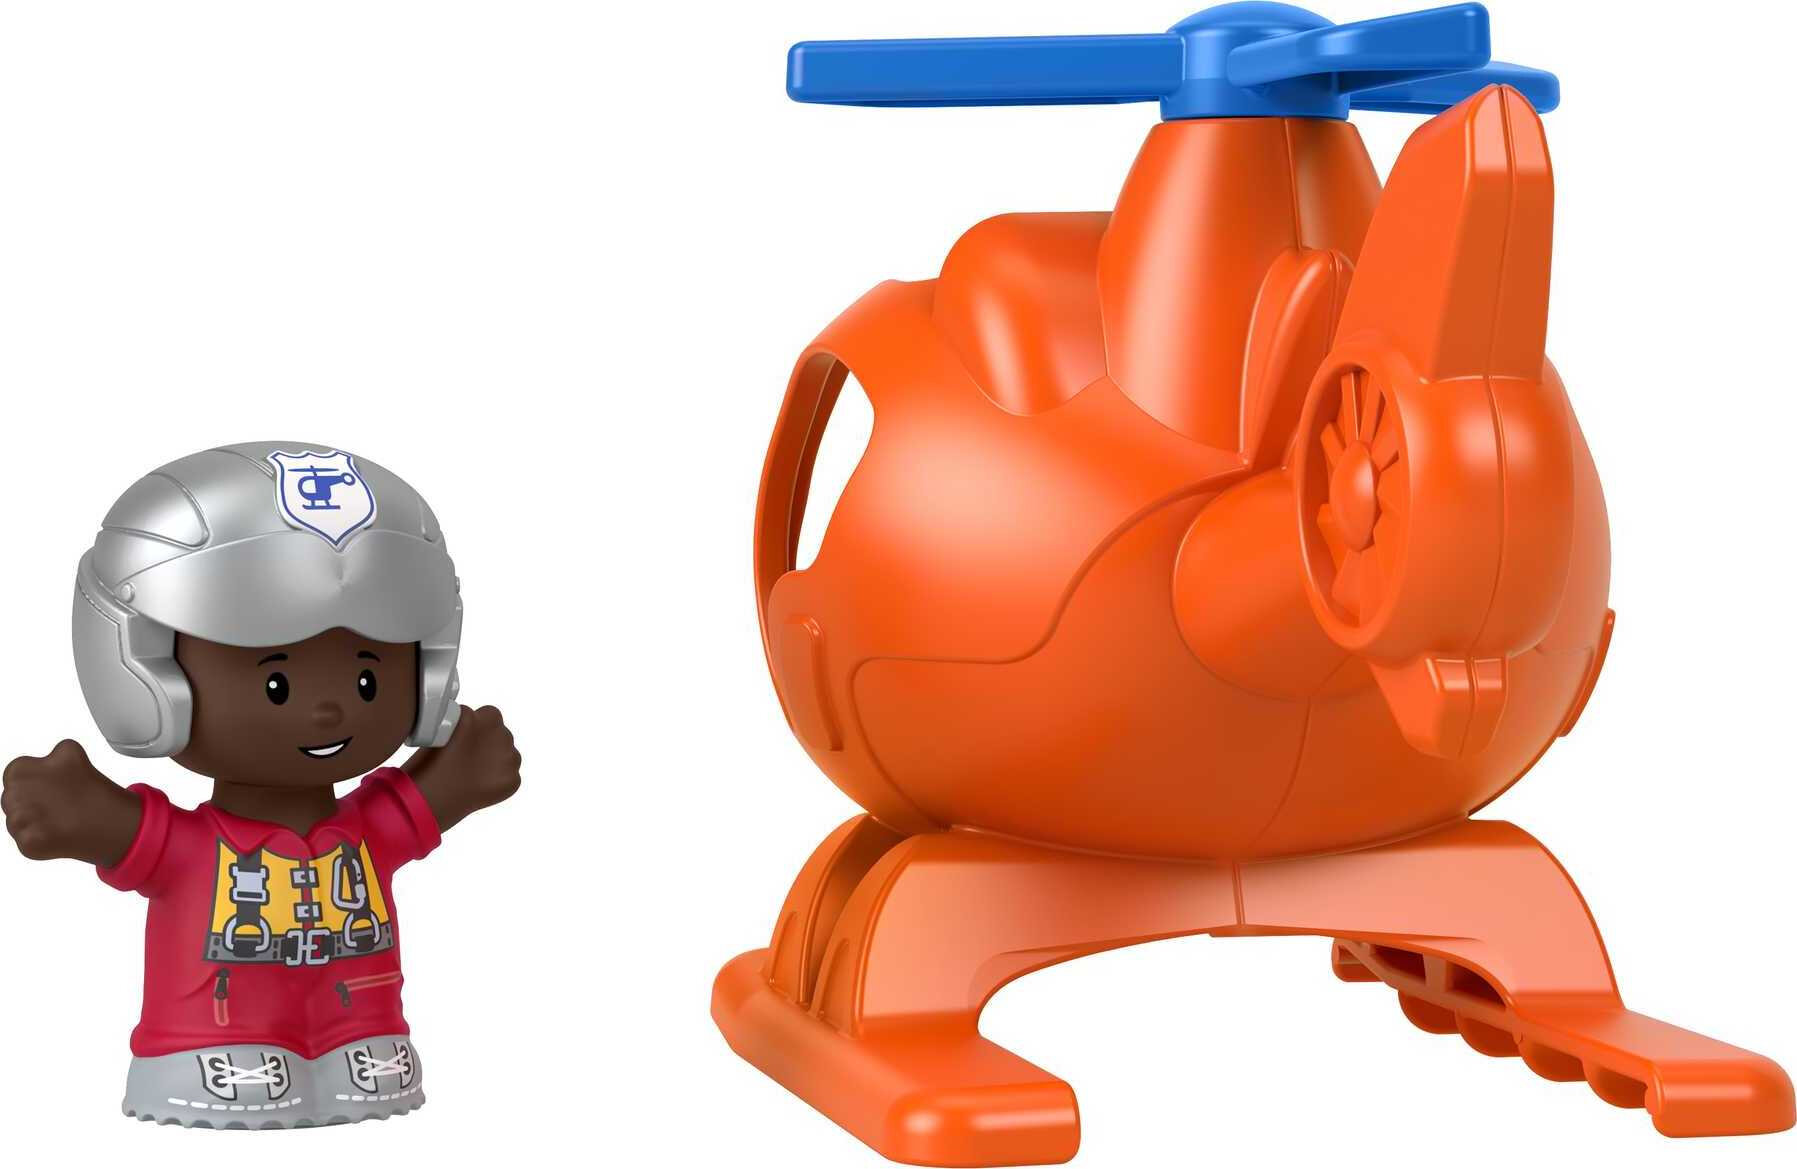 Fisher-Price Little People Helicopter Toy & Pilot Figure Set for Toddlers, 2 Pieces - image 5 of 6